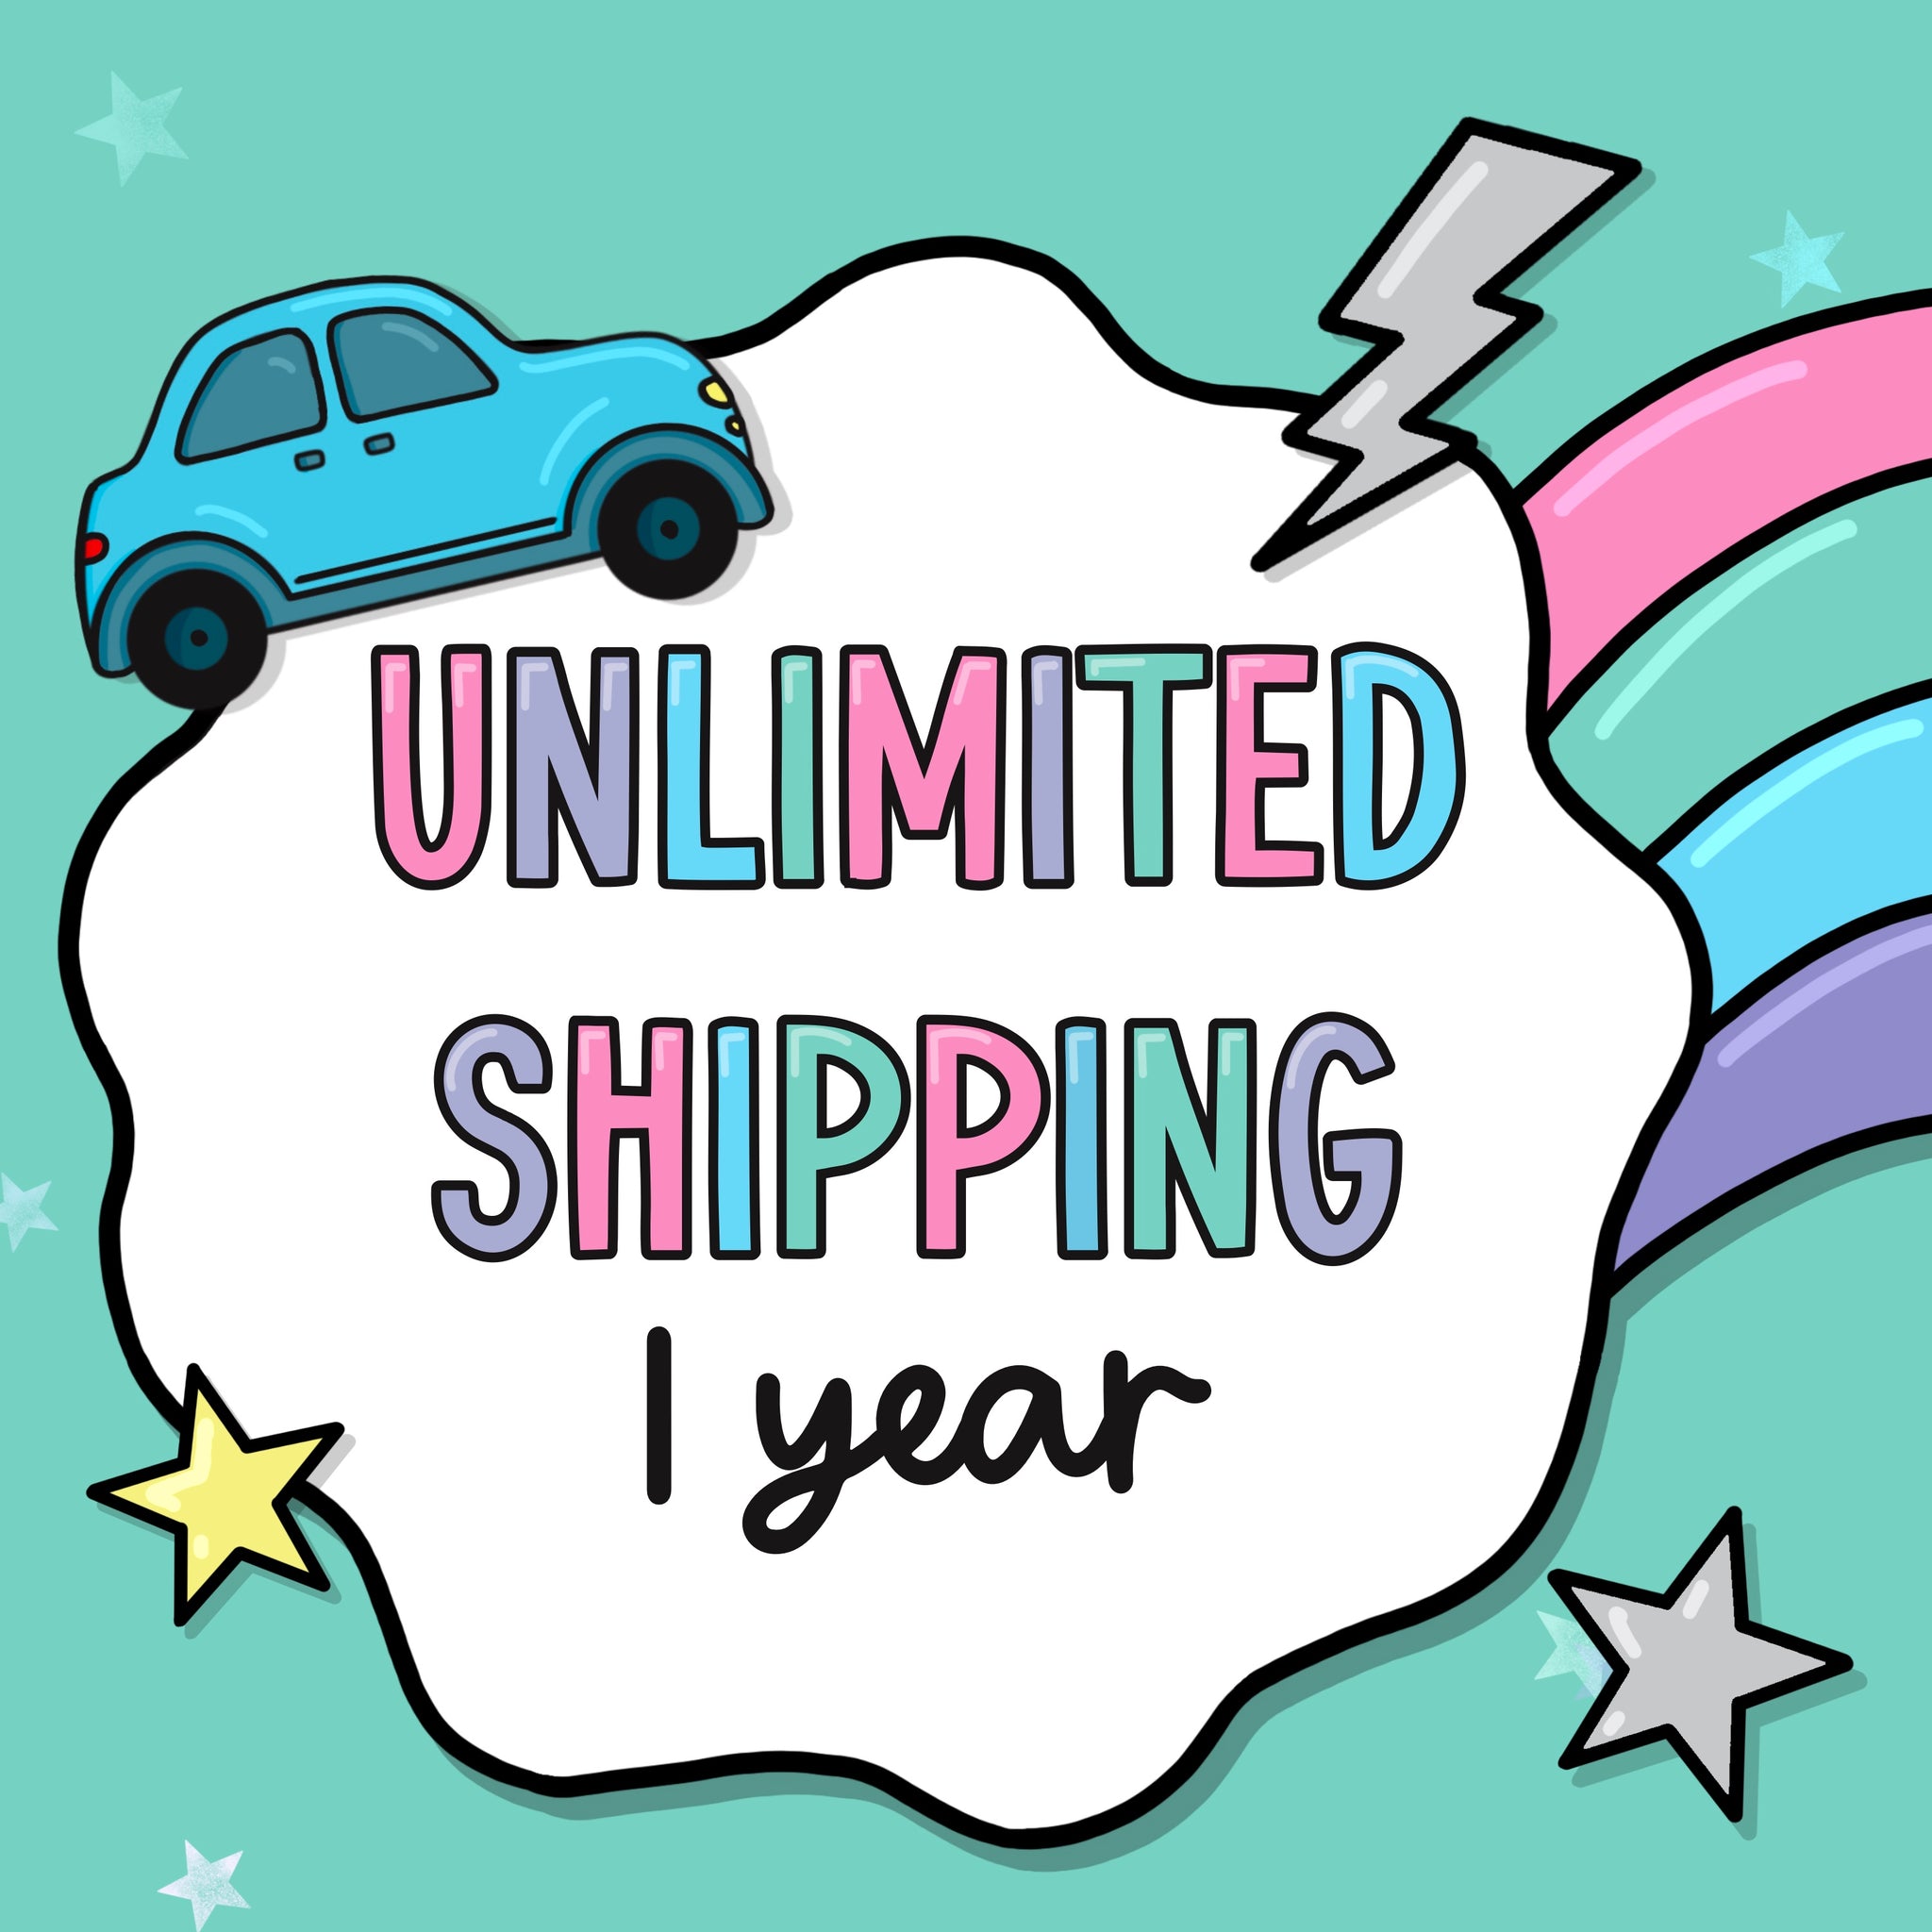 1 Year Unlimited Standard UK Shipping!